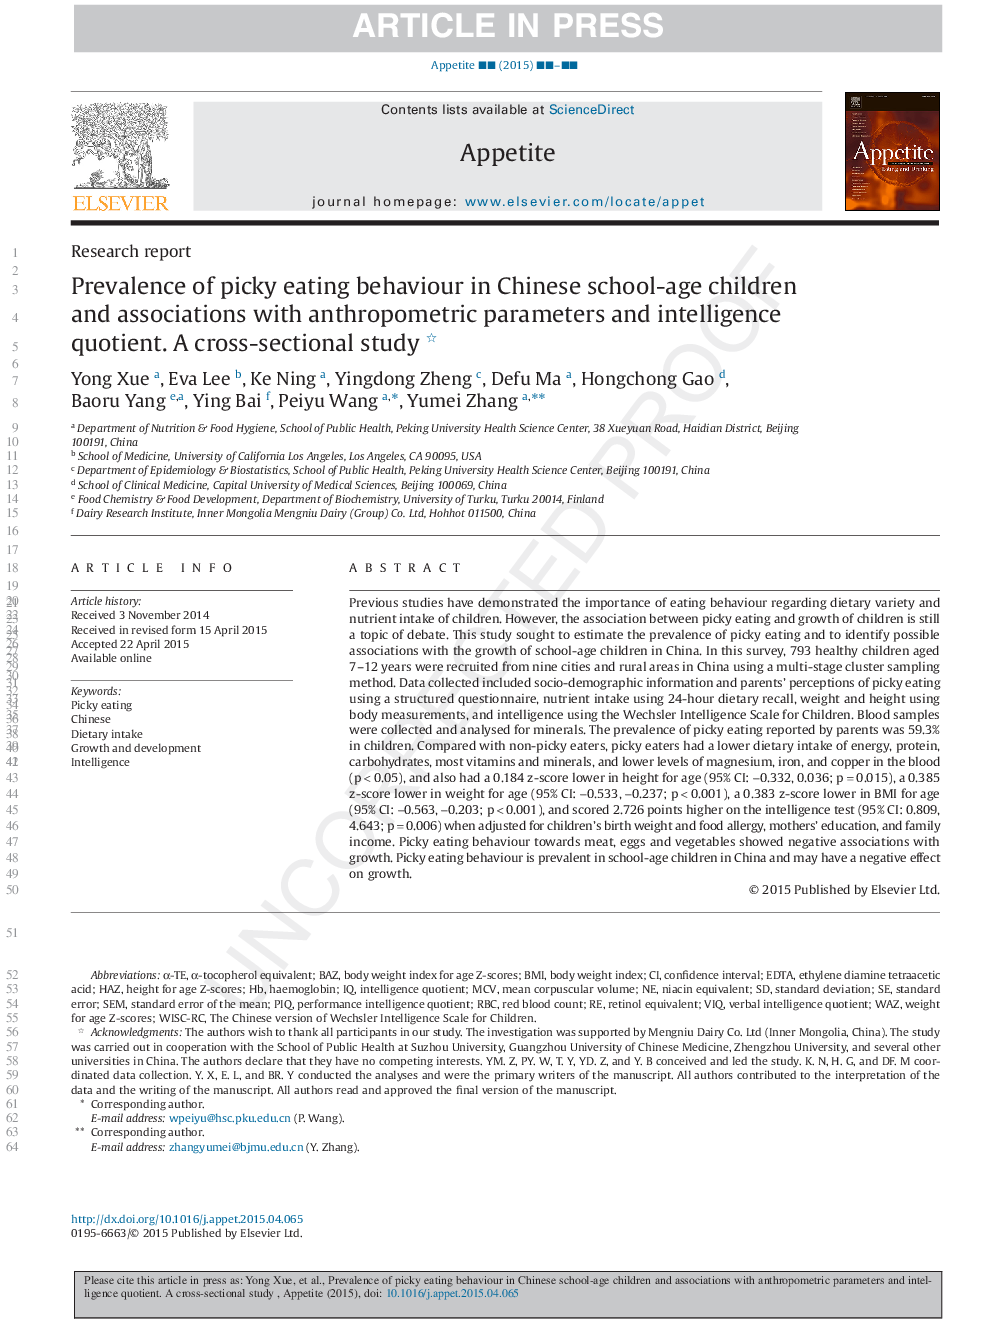 Prevalence of picky eating behaviour in Chinese school-age children and associations with anthropometric parameters and intelligence quotient. A cross-sectional study